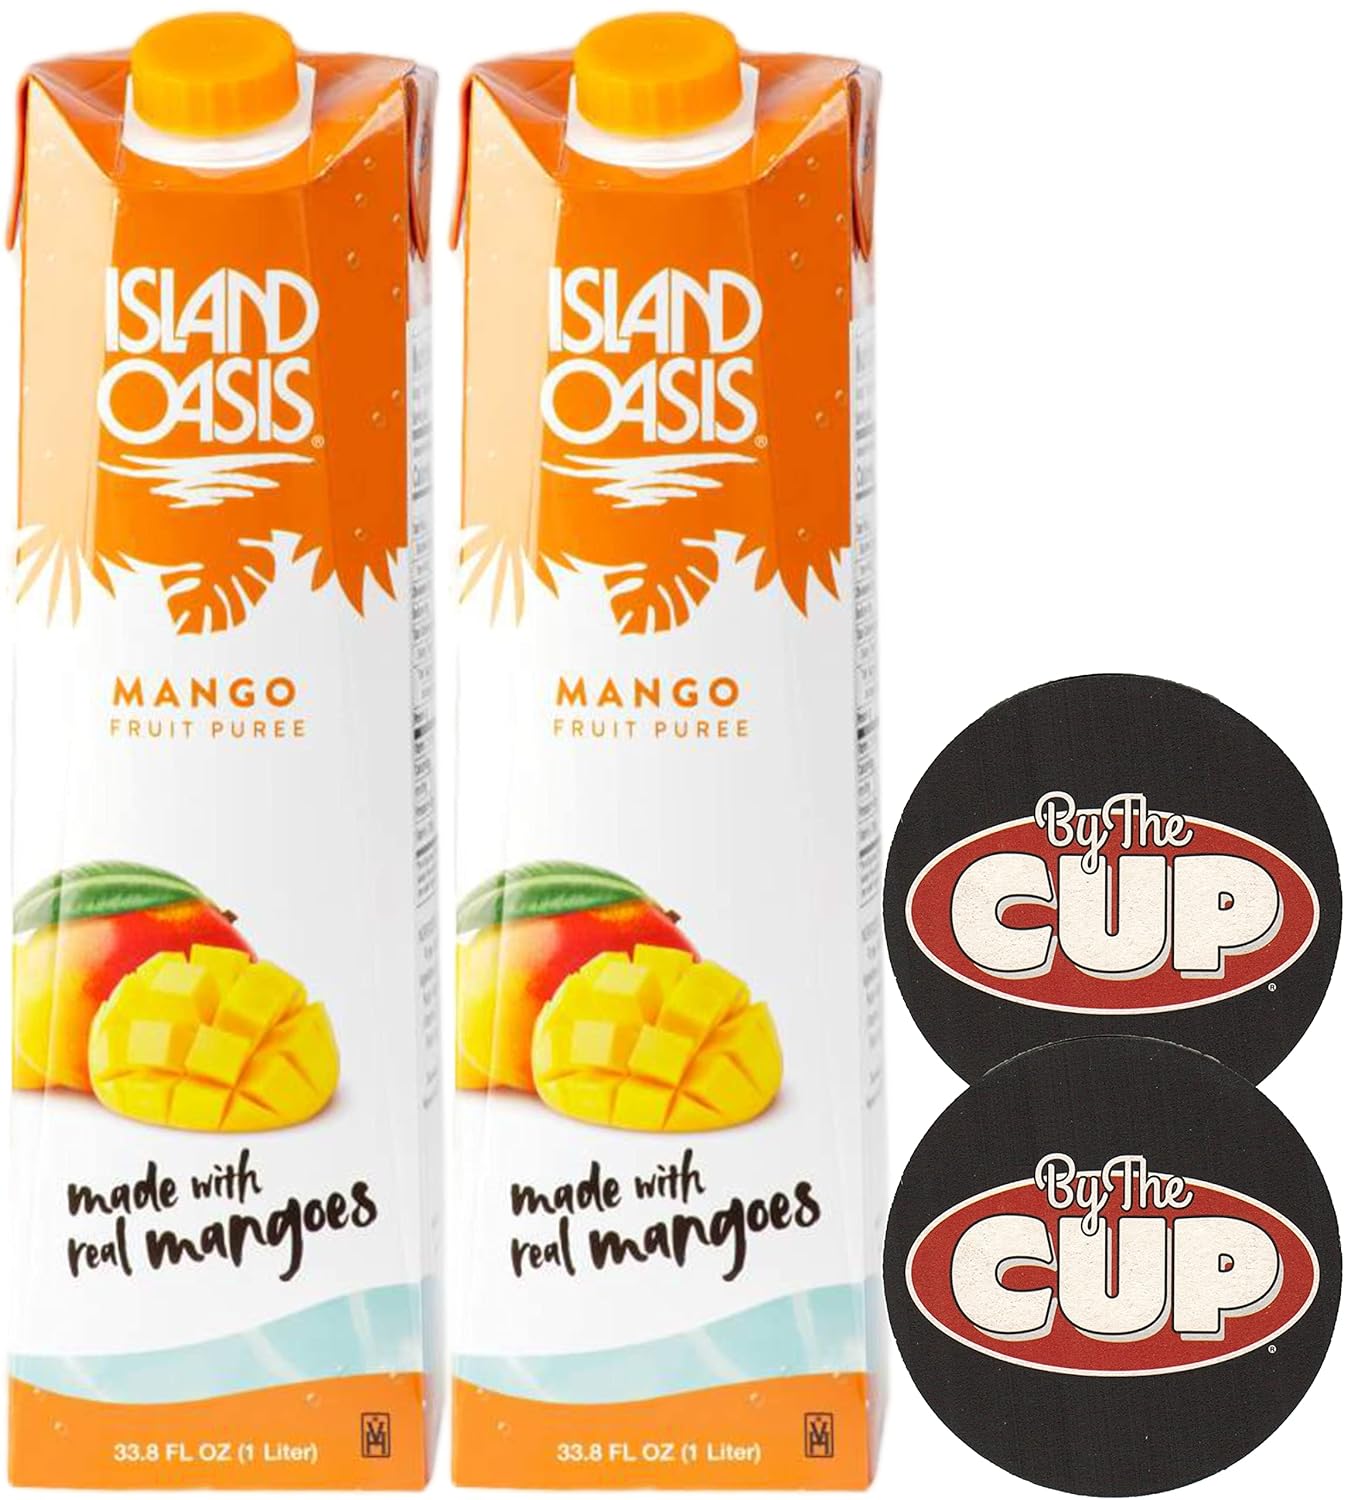 By The Cup Coasters Compatible with Island Oasis Mango Fruit Puree 1 Liter (Pack of 2)